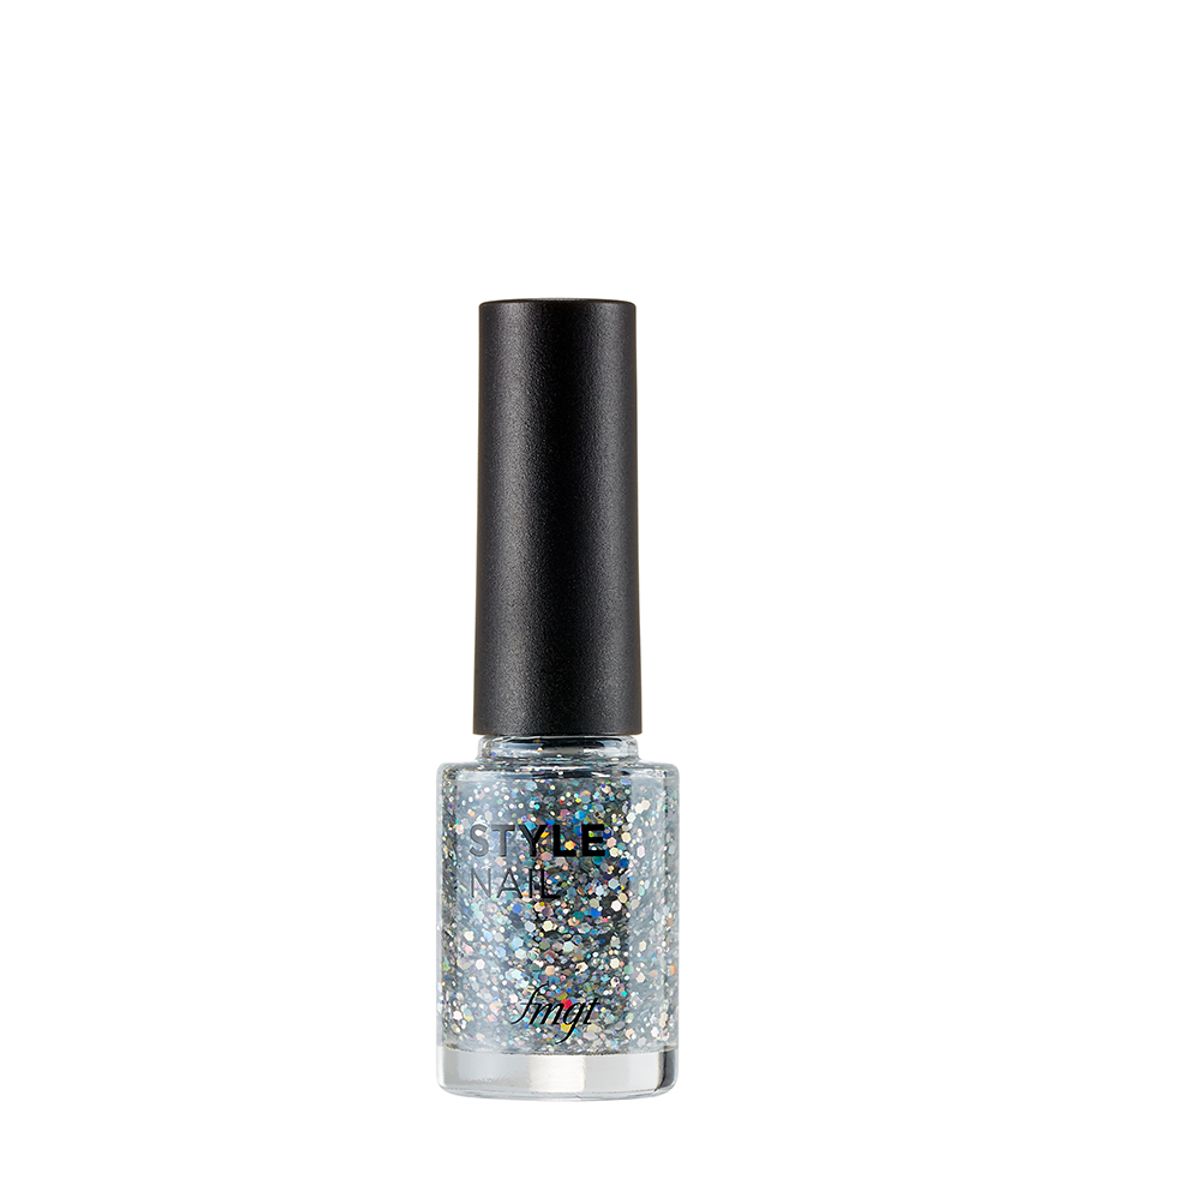 fmgt-son-mong-tay-thefaceshop-style-nail-7ml-6